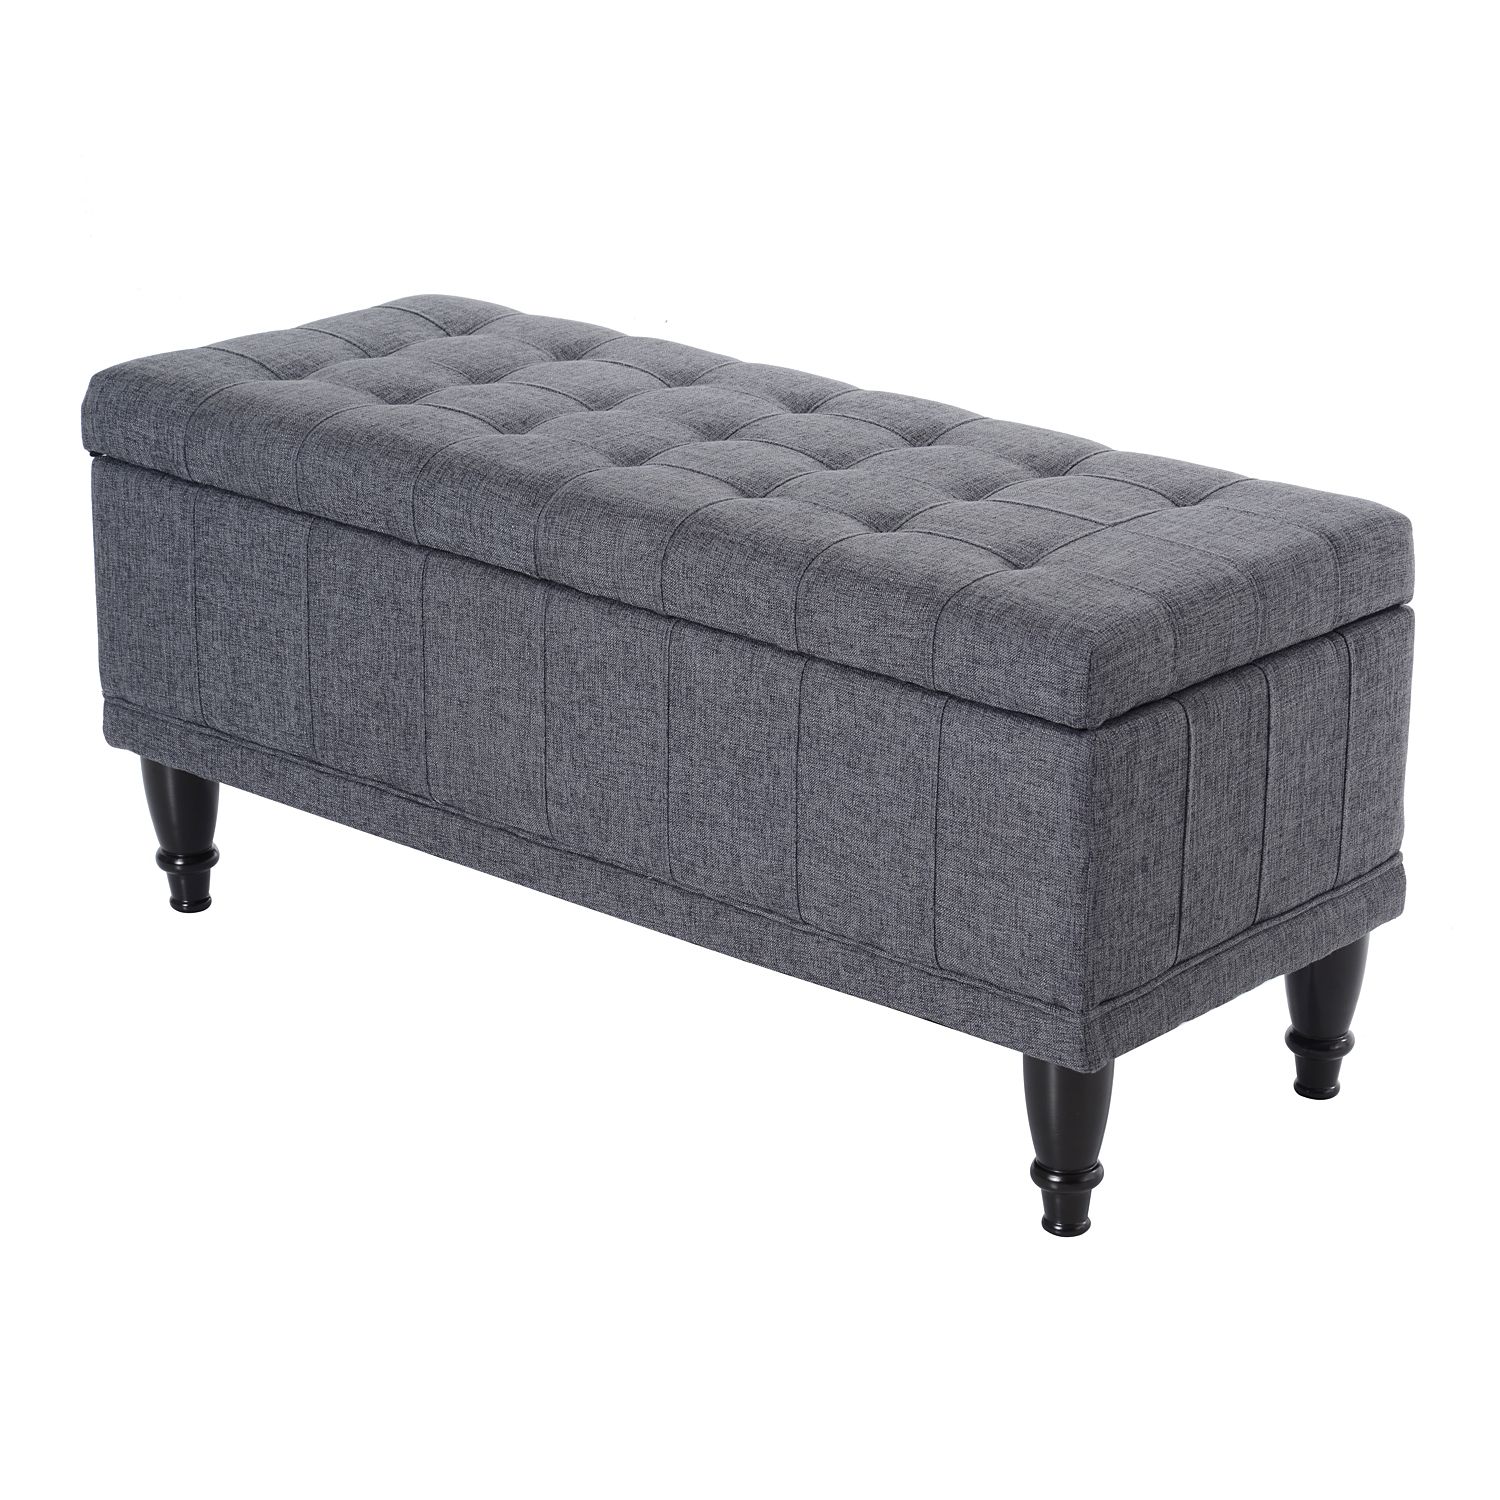 Charcoal Fabric Tufted Storage Ottomans Regarding Favorite Large 42" Tufted Linen Fabric Ottoman Storage Bench – Dark Heather Grey (View 1 of 10)